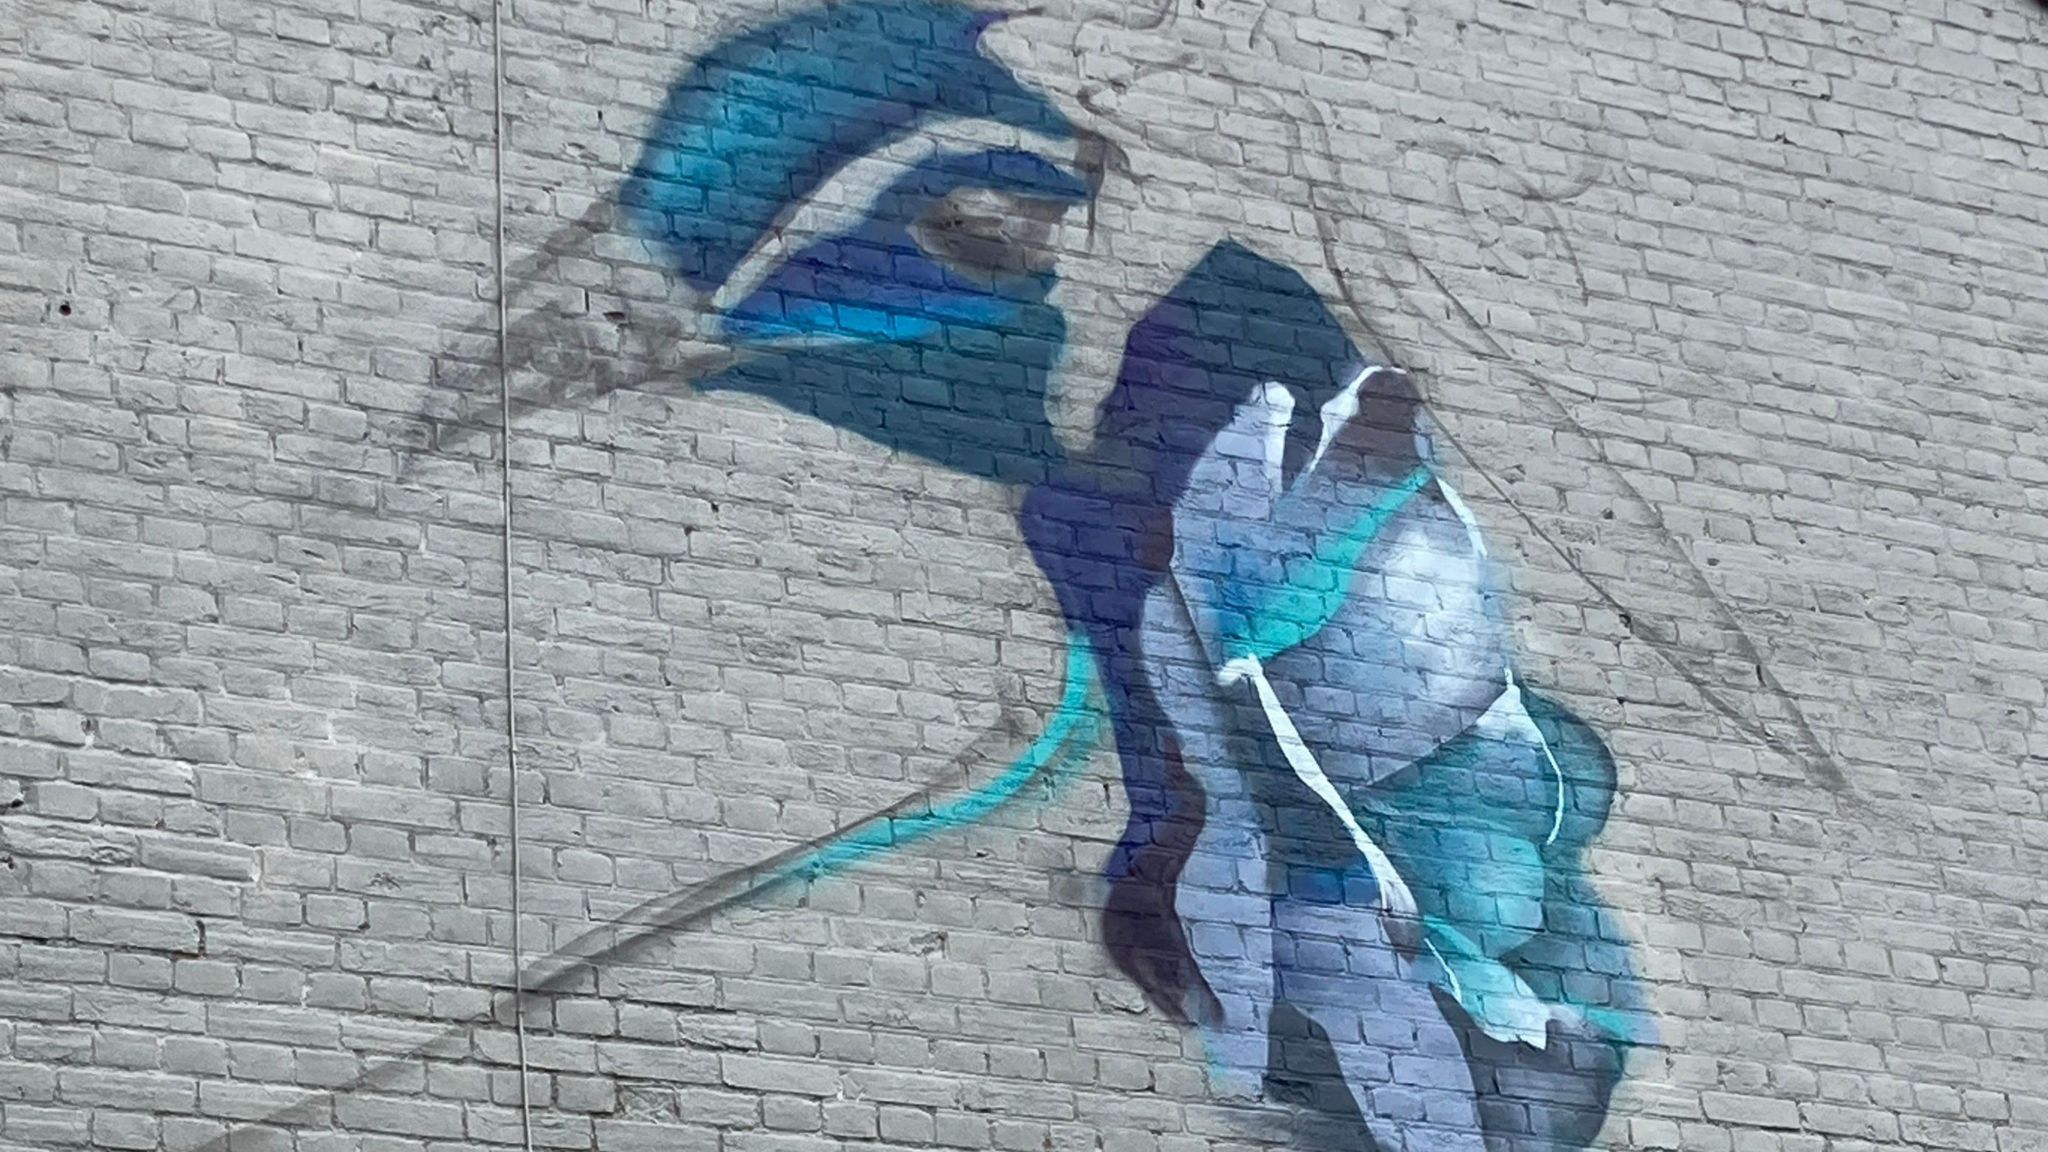 A partially finished painting of a blue and purple peacock on a grey wall.